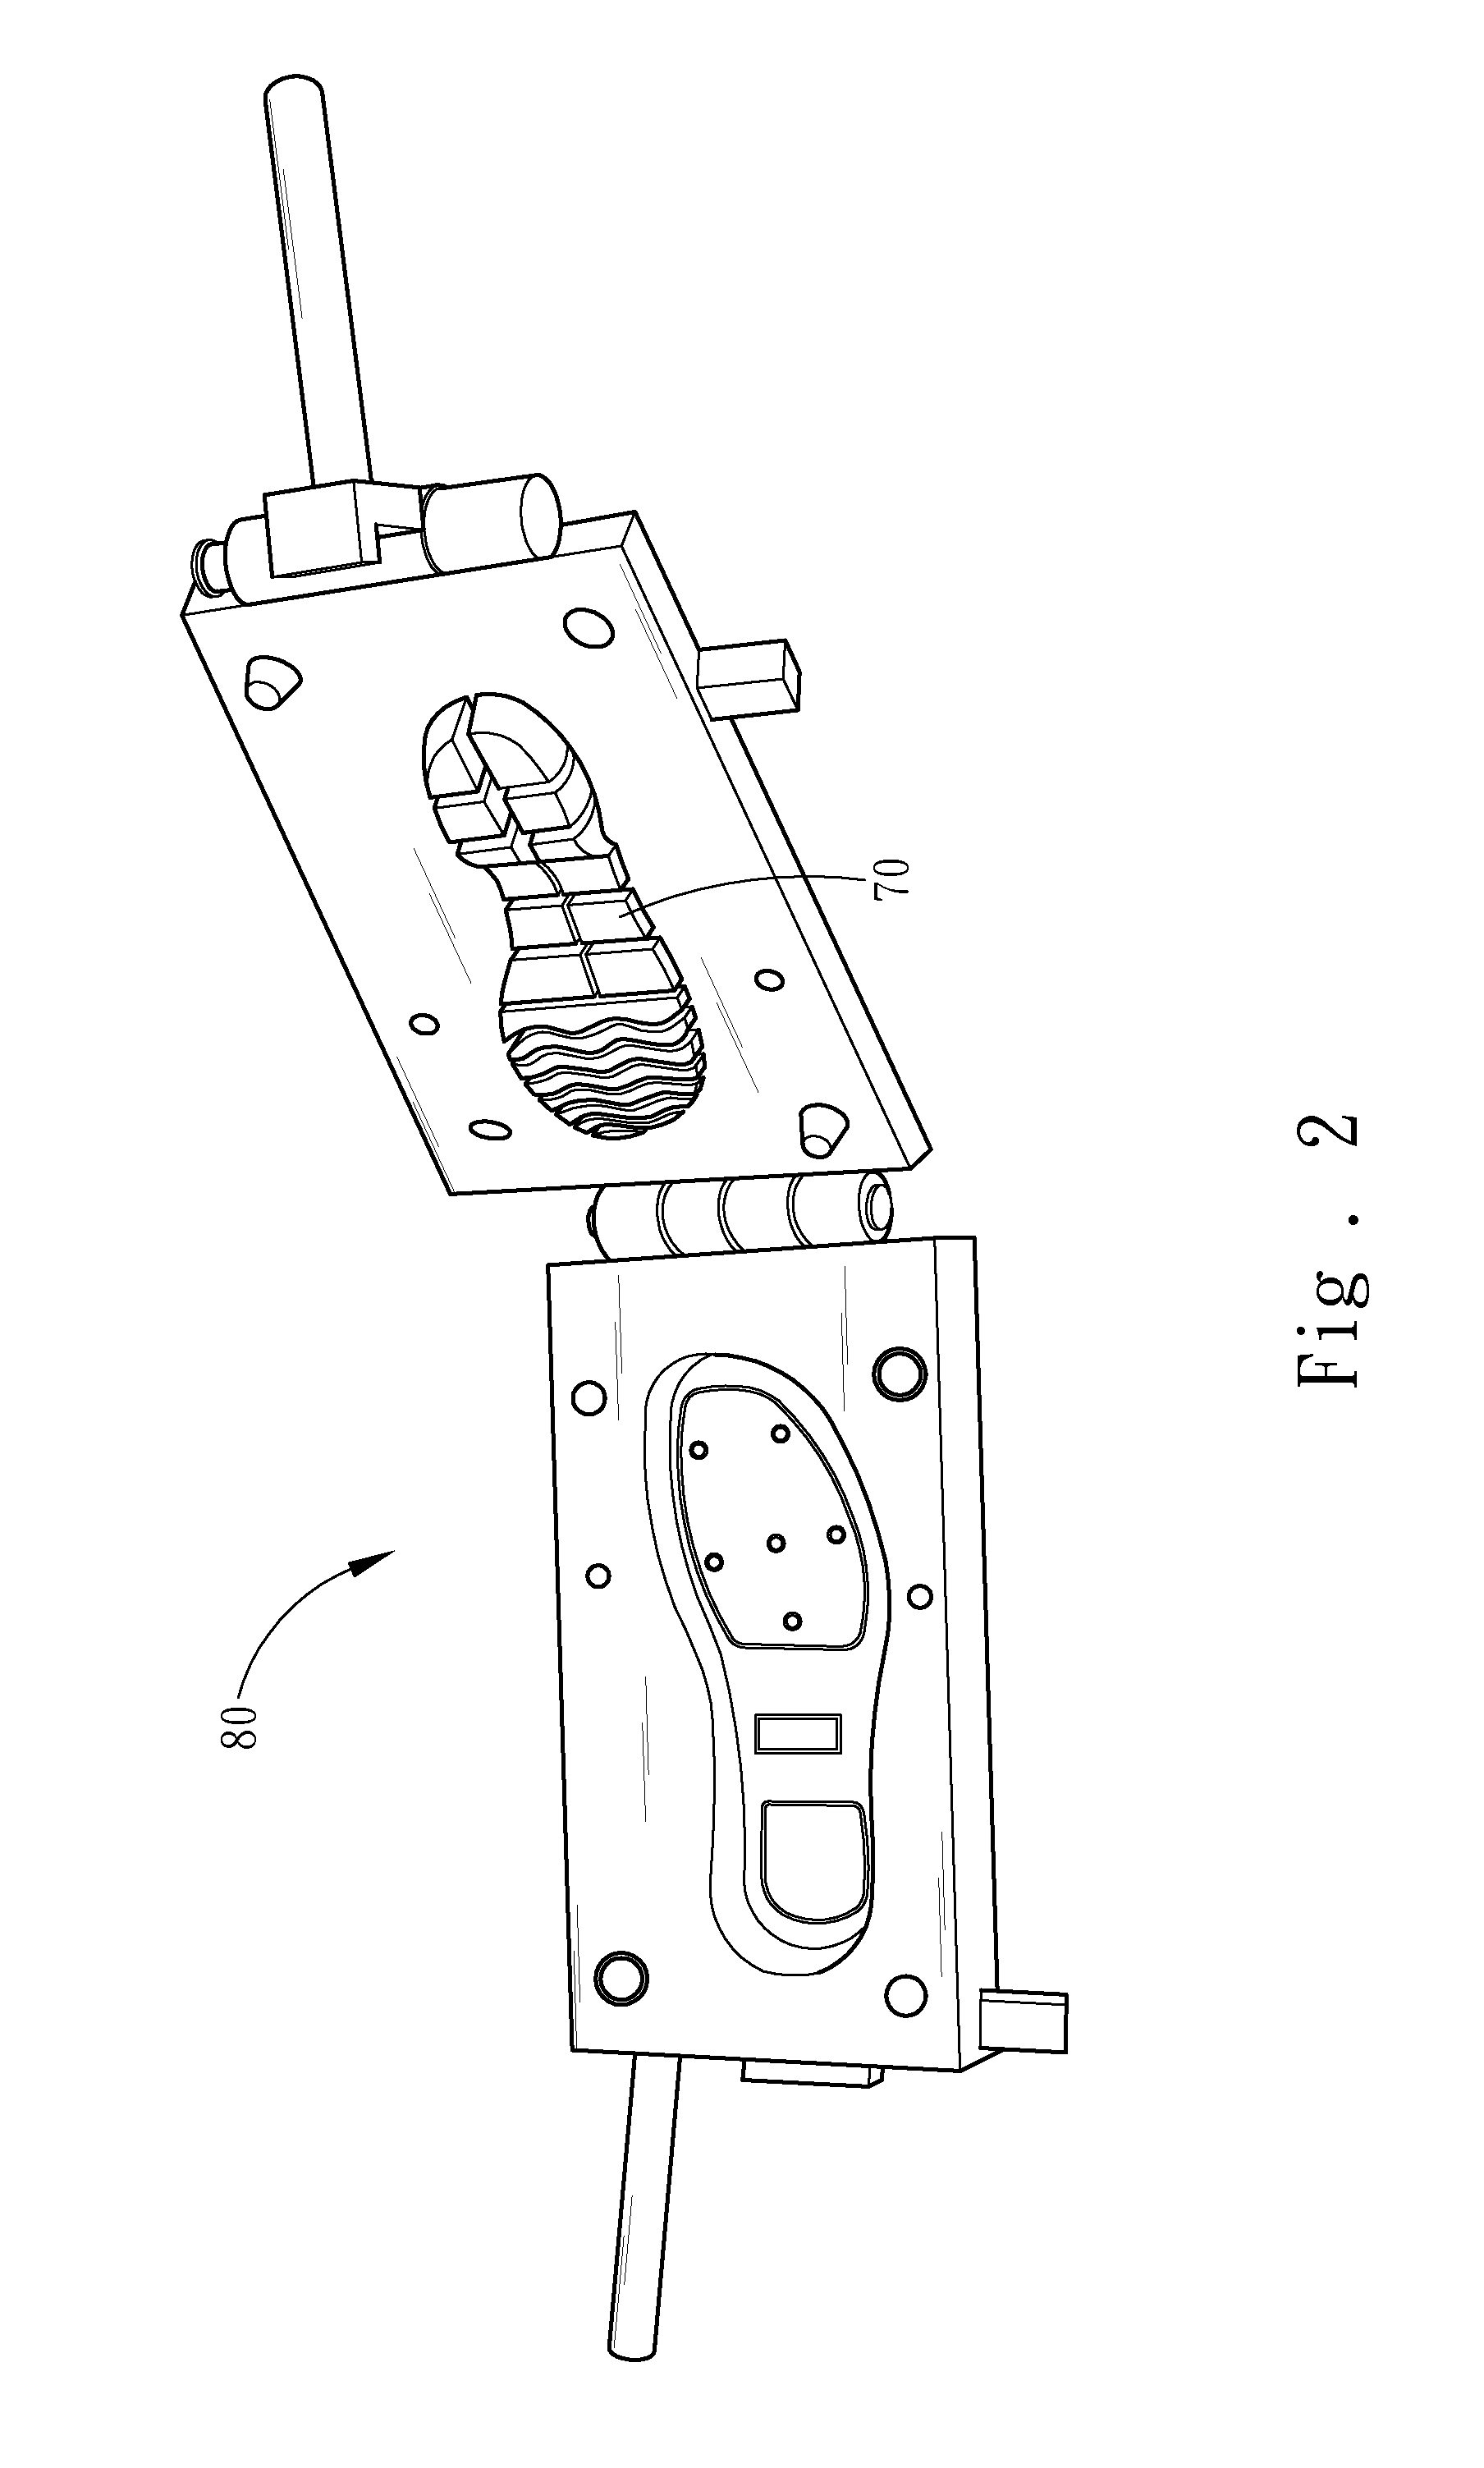 Method of manufacturing shoe outsoles from waste plant fibers